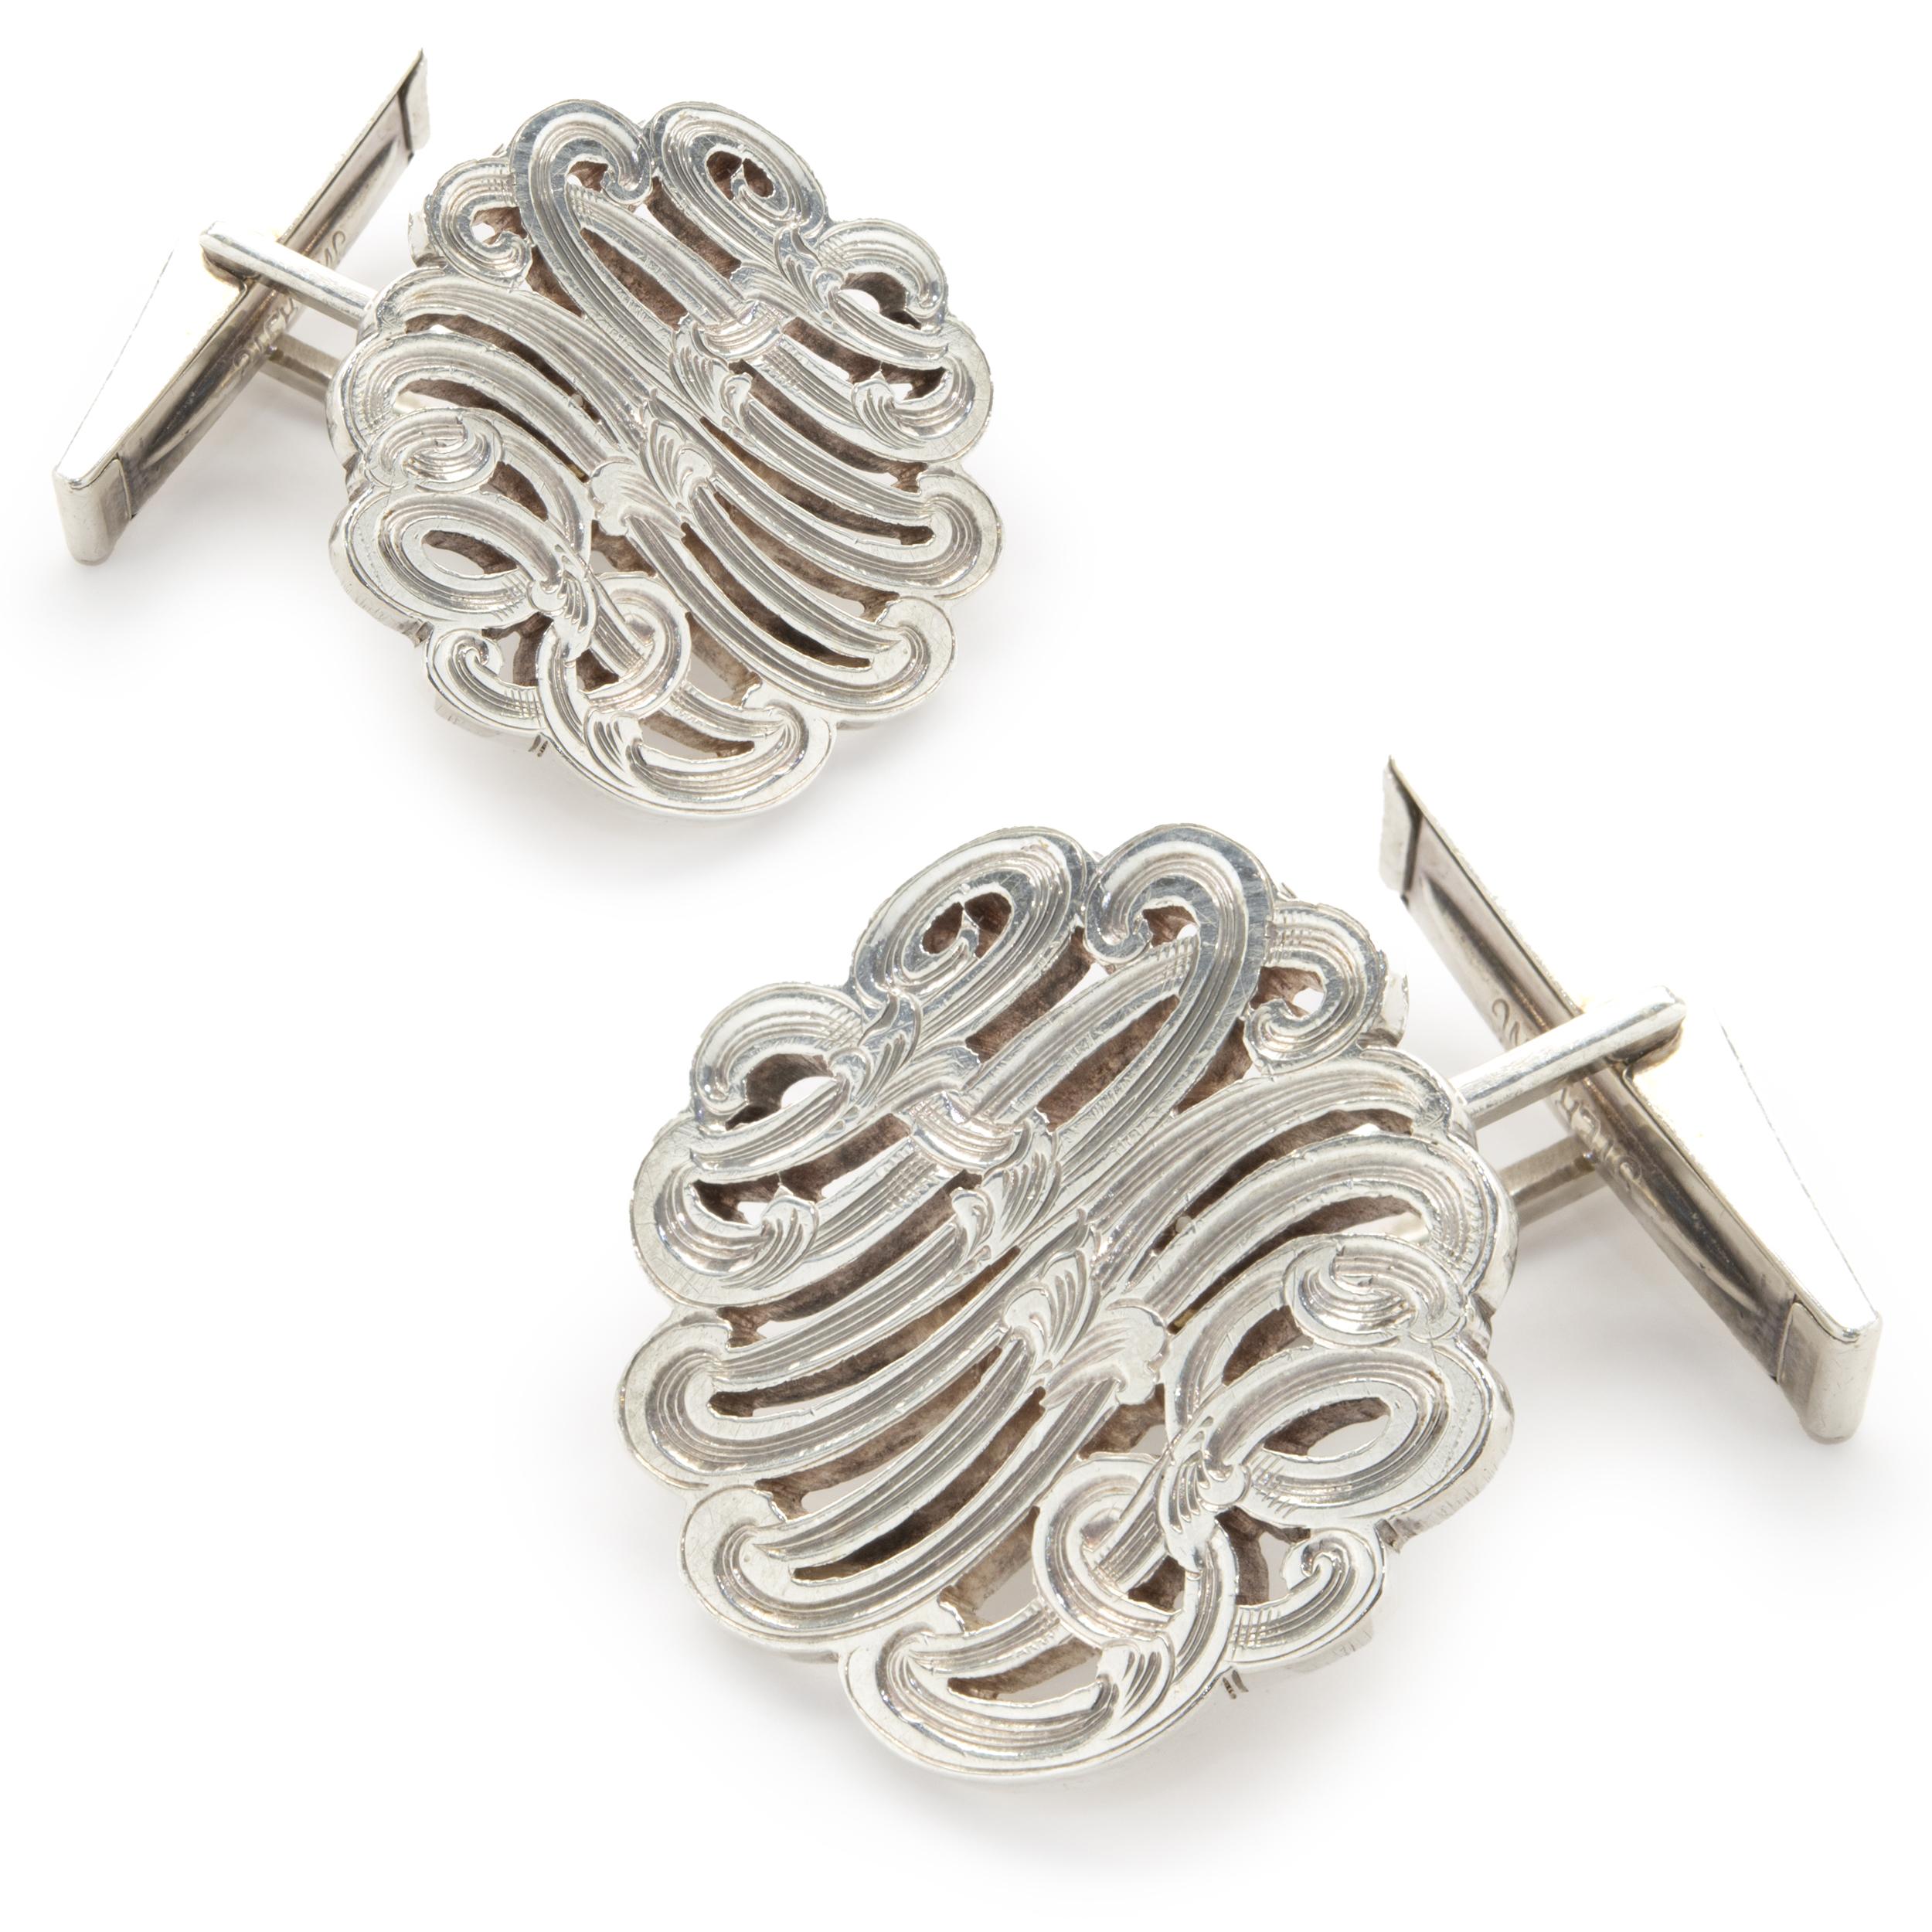 Material: sterling silver
Dimensions: cufflinks measure 22.5mm 
Weight: 14.94 grams